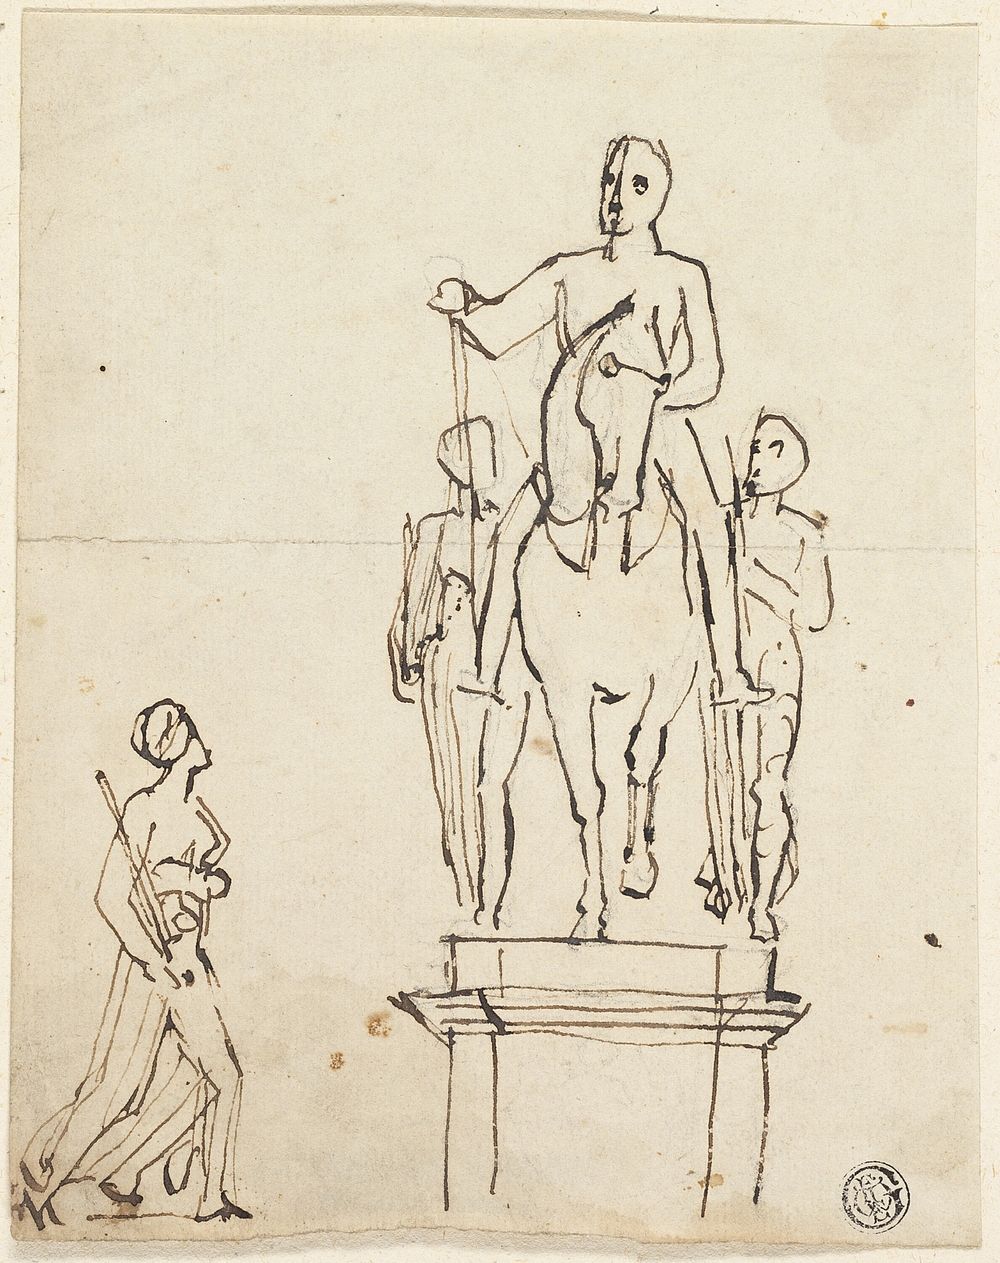 Sculpture of Horseman Accompanied by Two Standing Figures, with Sketch of One of Latter by Thomas Stothard